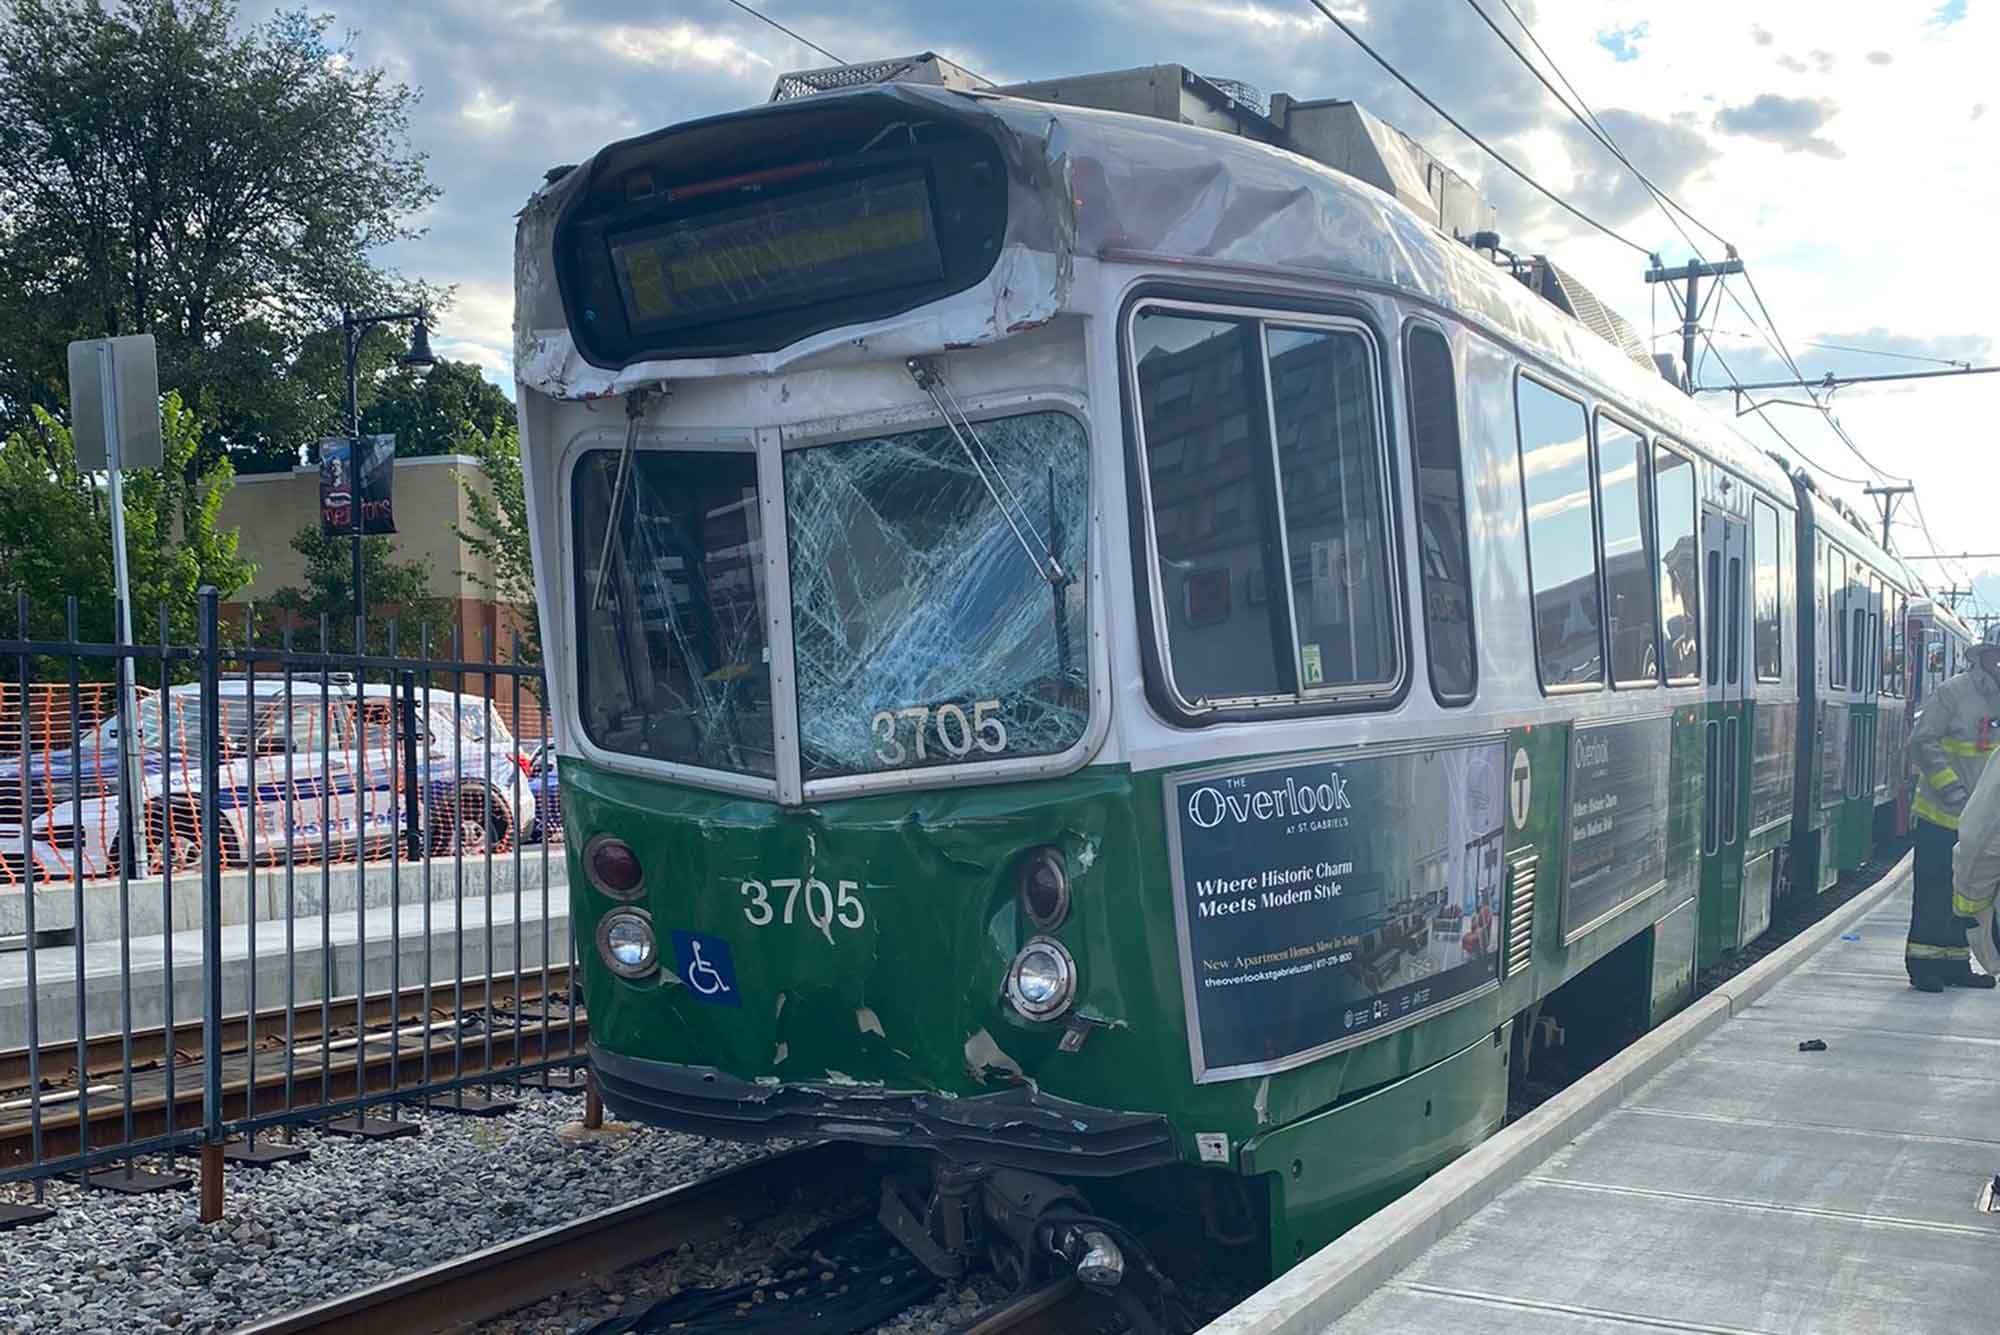 One of two MBTA Green B Line Cars damaged in a collision.